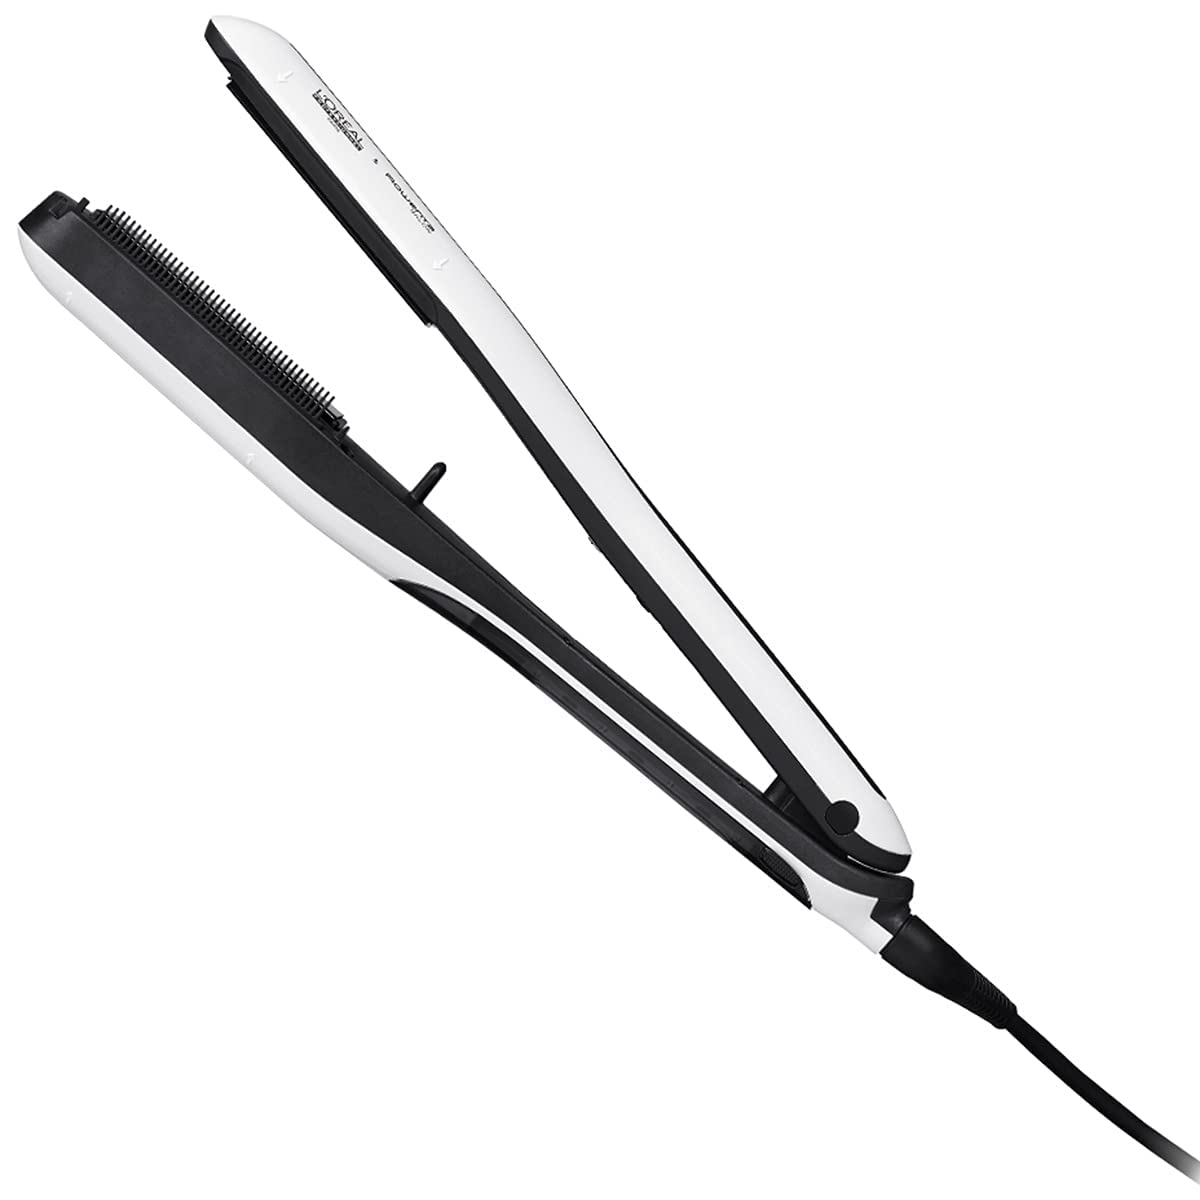 L'Oréal Professionnel Steam Hair Straightener & Styling Tool | Steampod Professional Styler | For All Hair Types and Textures | Smooths and Adds Shine